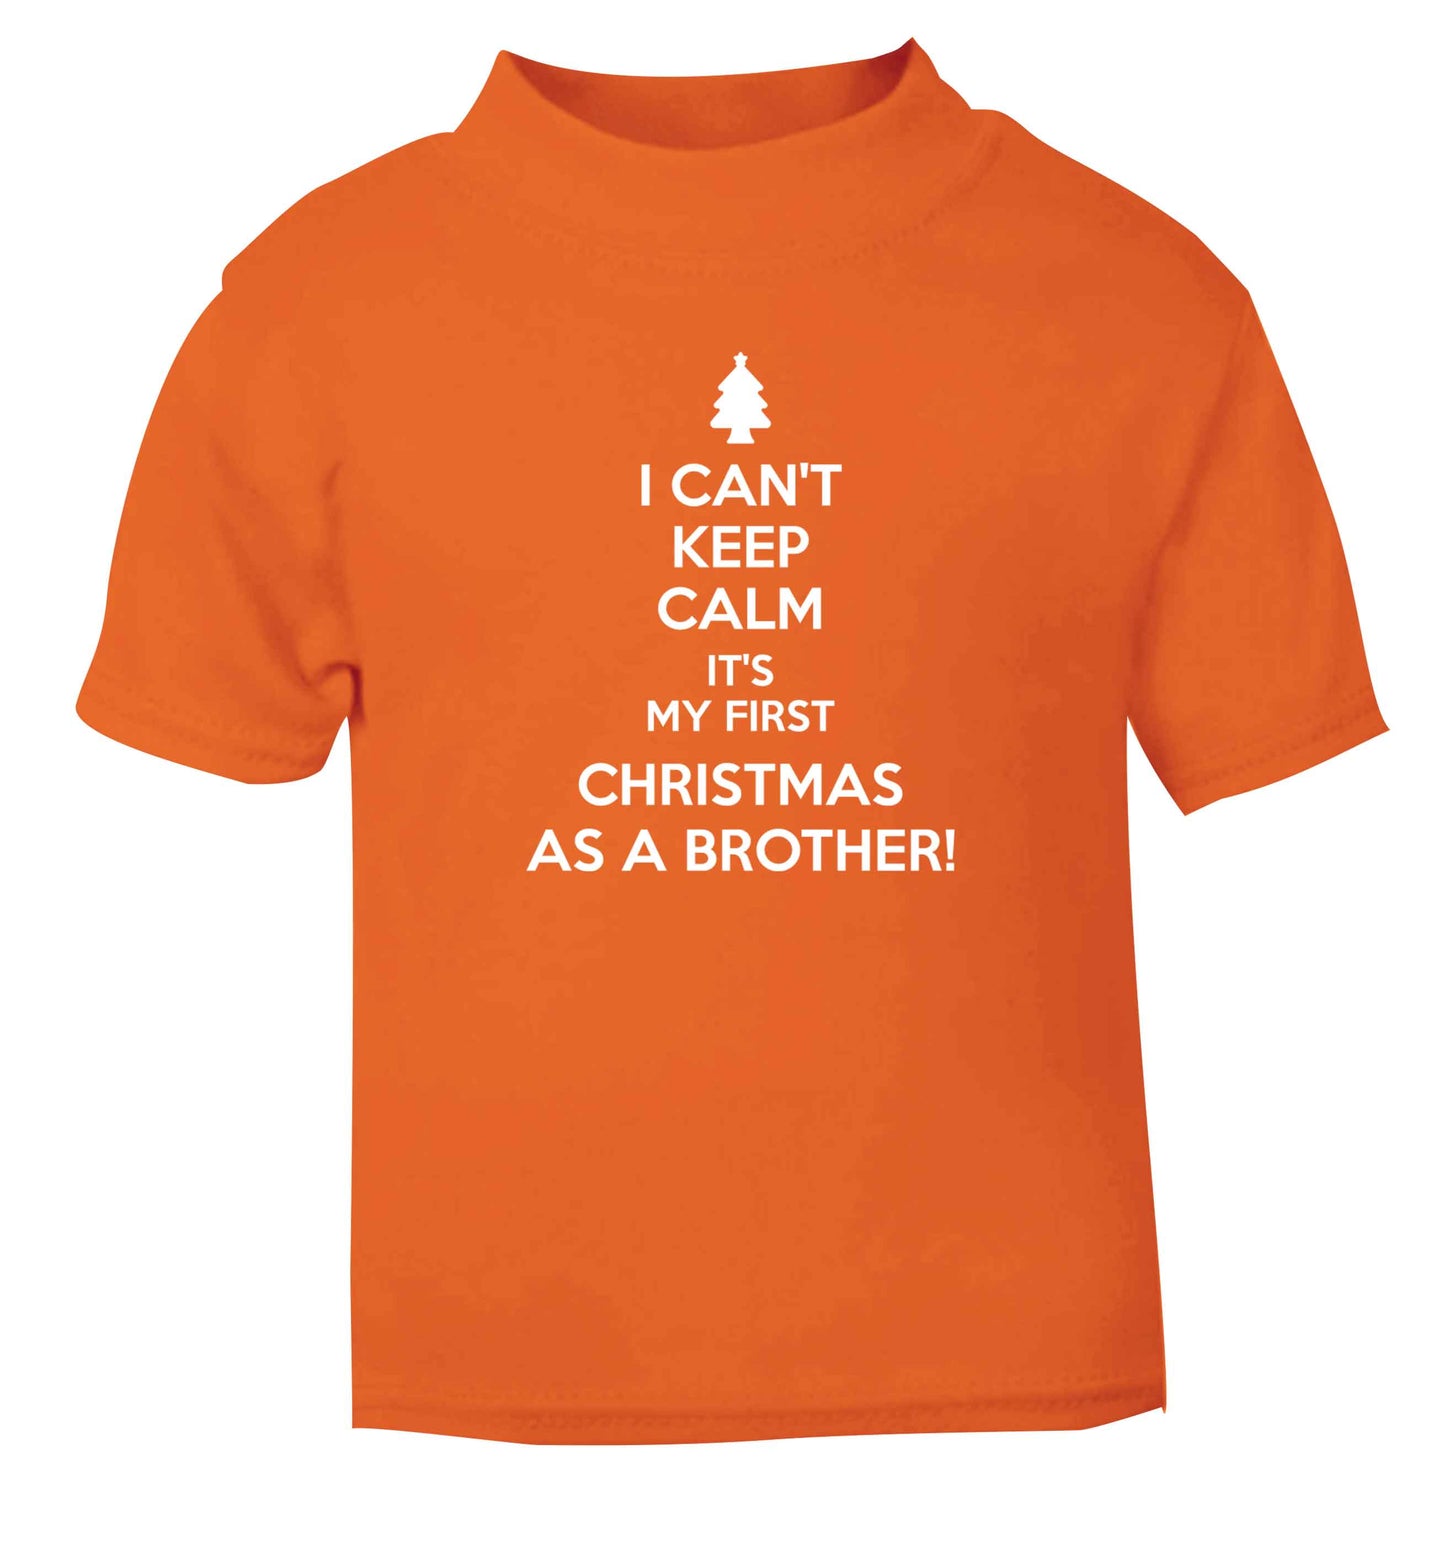 I can't keep calm it's my first Christmas as a brother! orange Baby Toddler Tshirt 2 Years